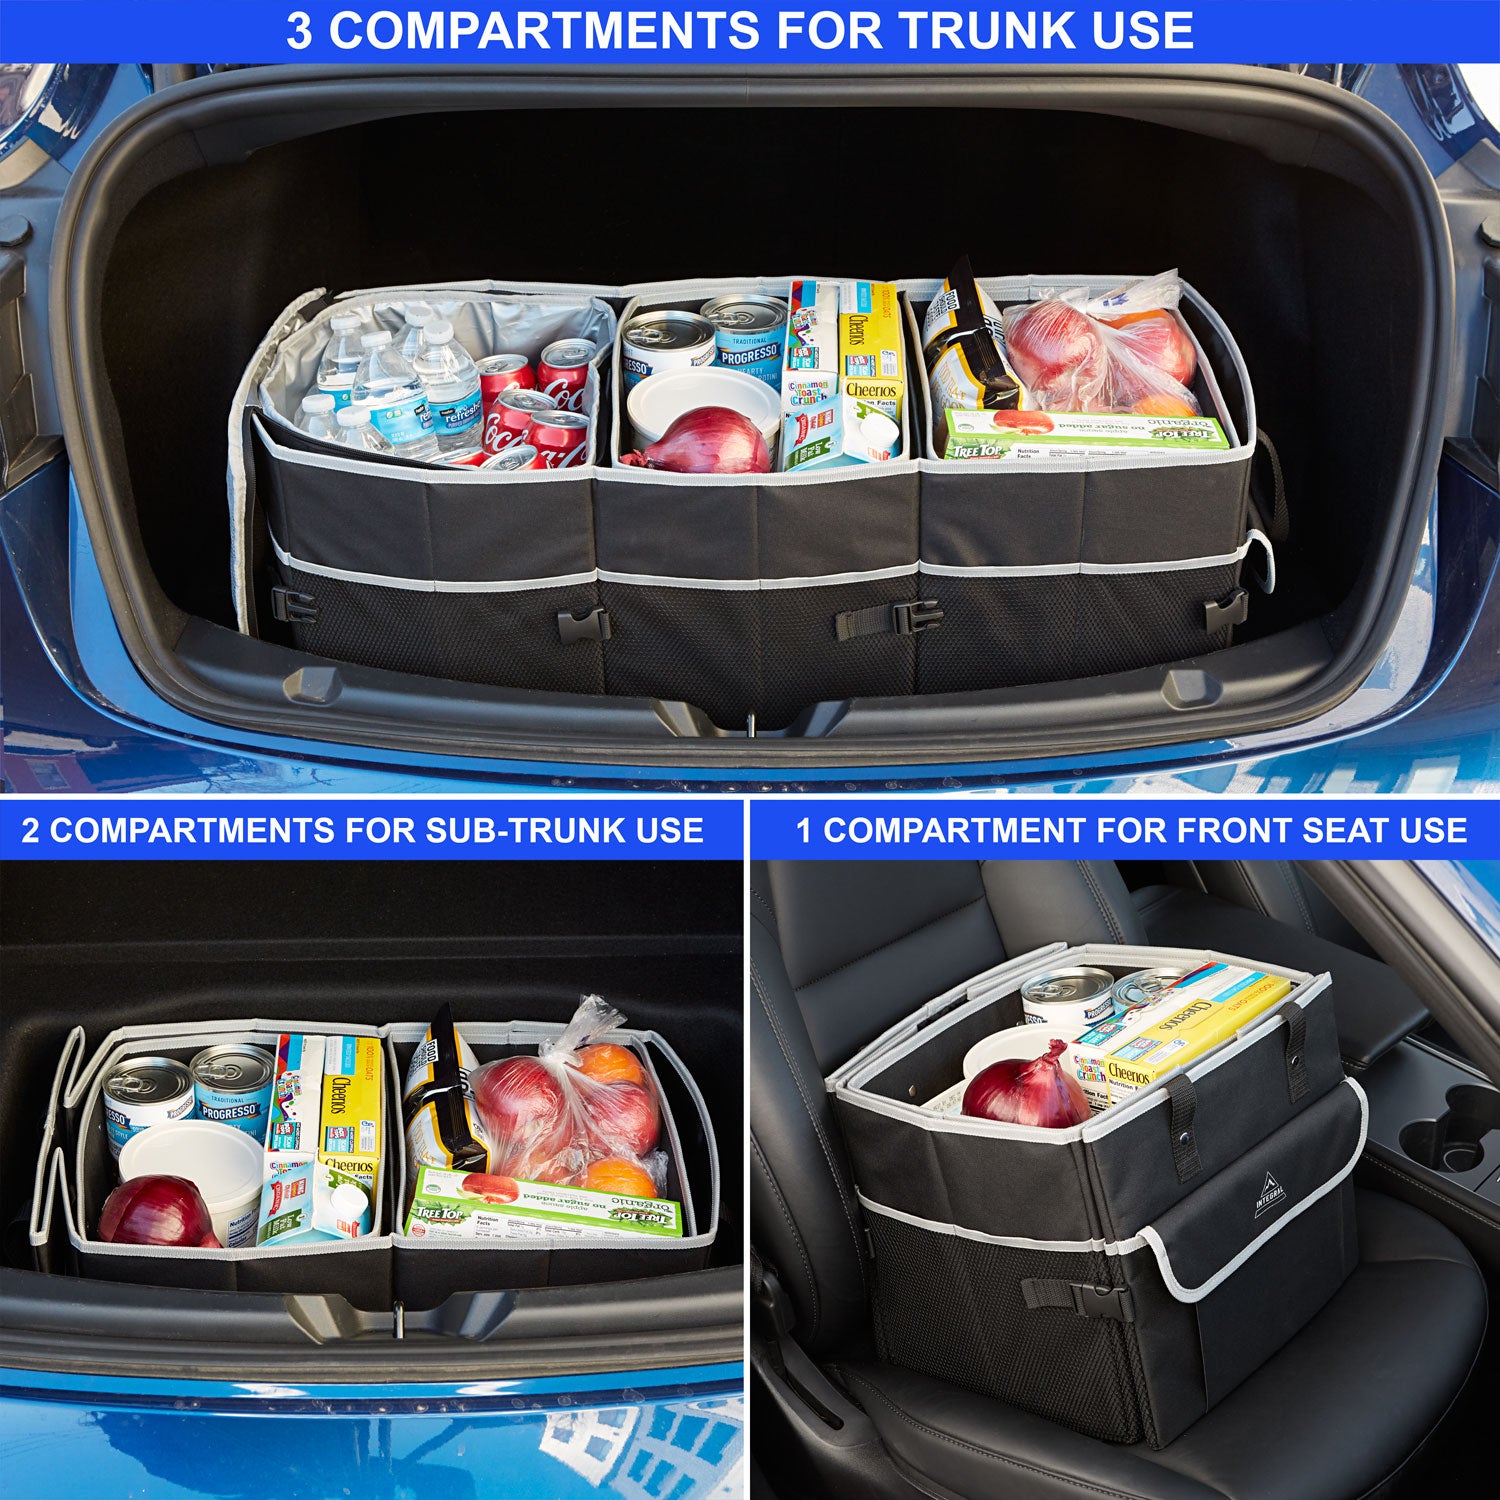 Integral™ Trunk Organizer With Cooler and Reusable Bags – Integral Travel